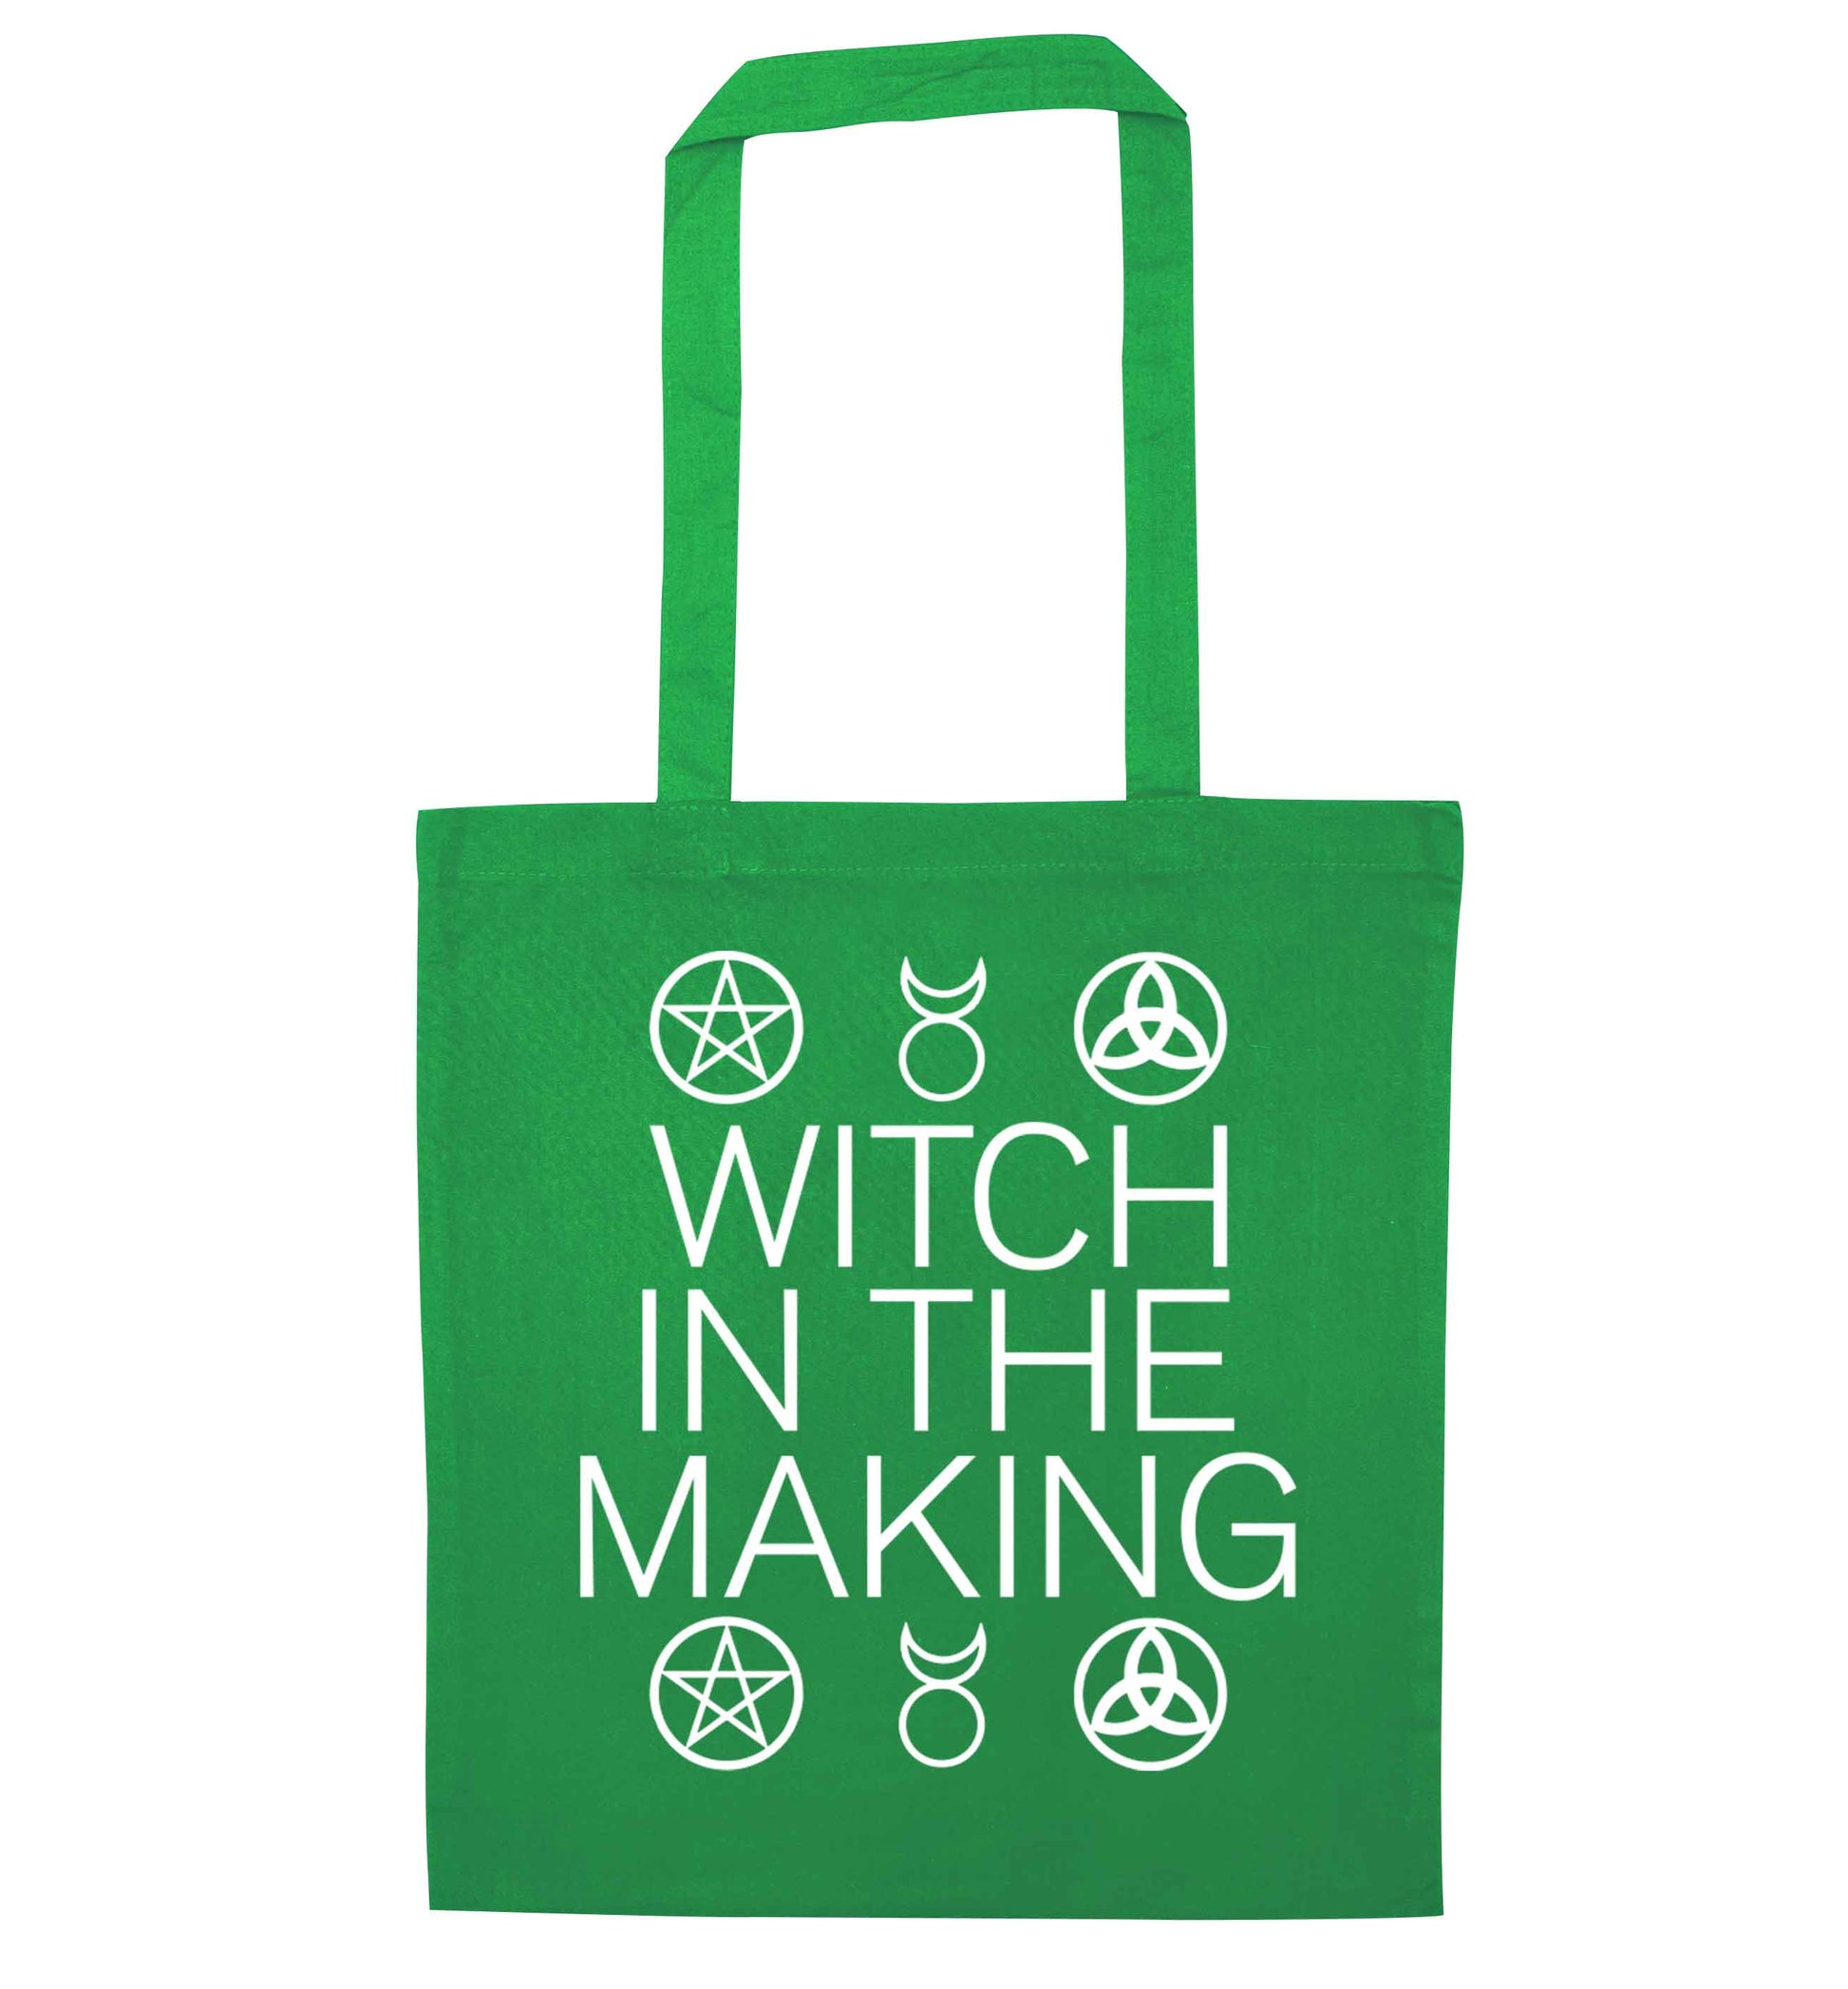 Witch in the making green tote bag